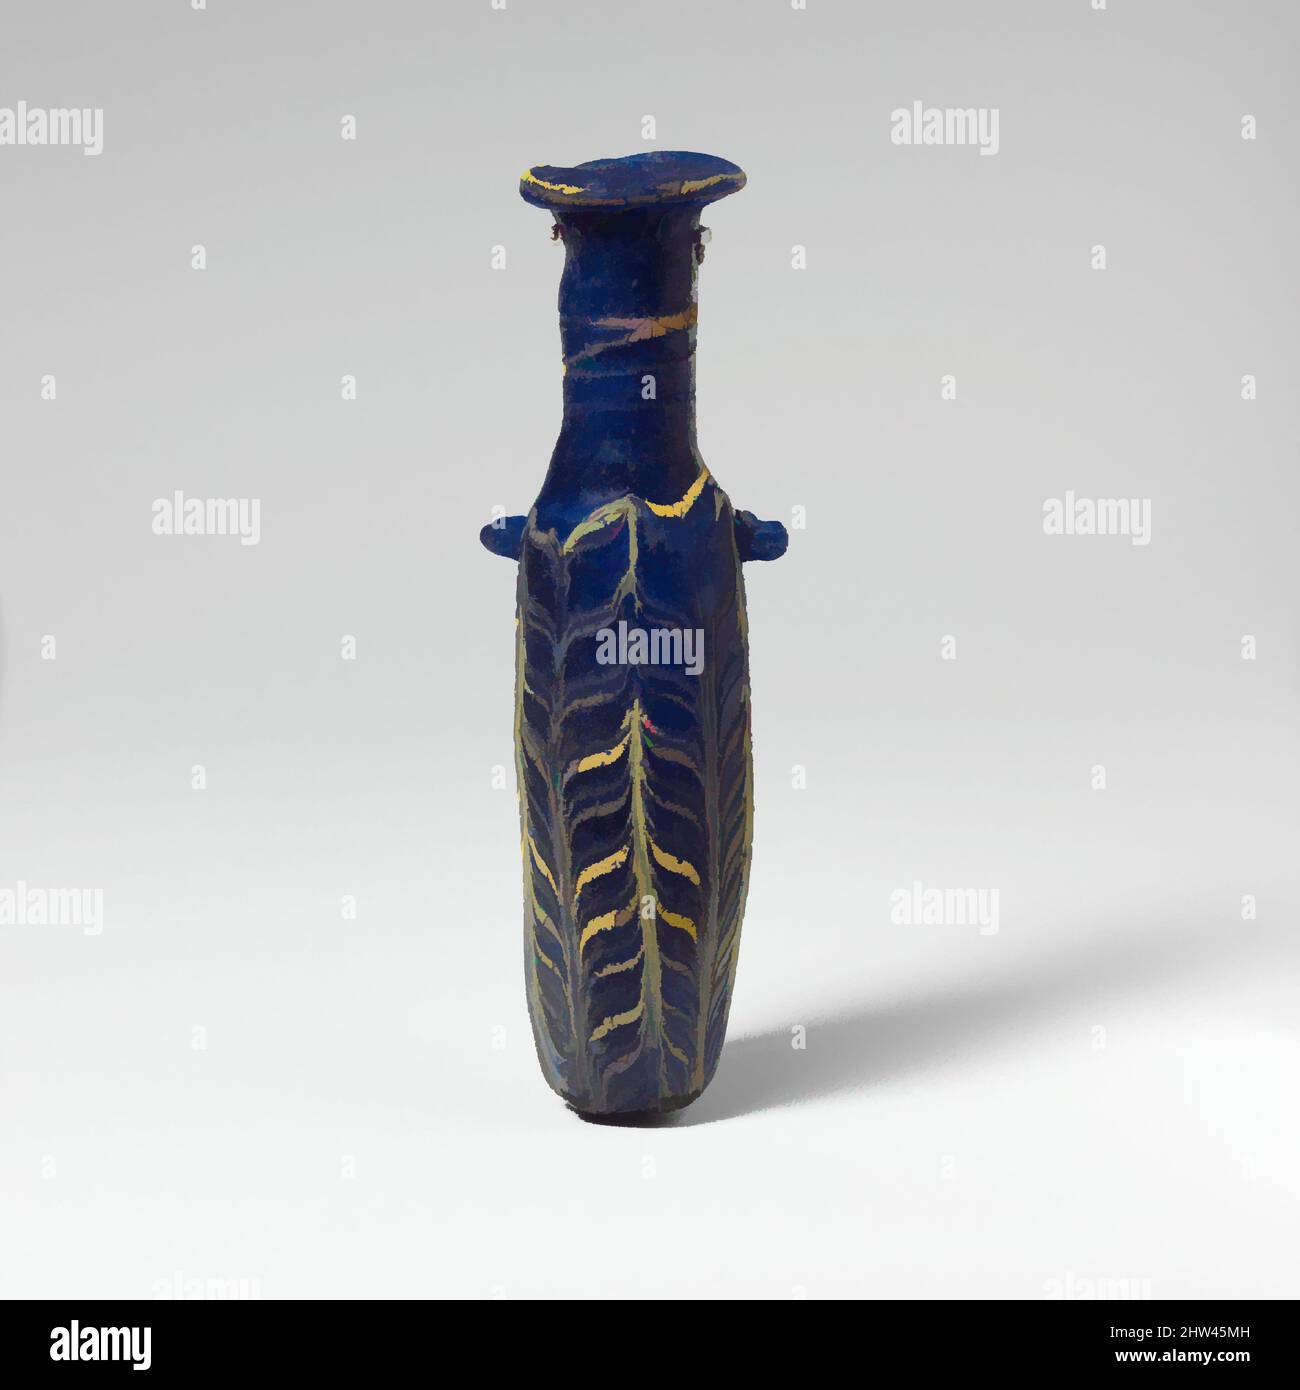 Art inspired by Glass alabastron (perfume bottle), Hellenistic, 3rd–2nd century B.C., Greek, Eastern Mediterranean, Glass; core-formed, Group III, H.: 5 1/2 in. (14 cm), Glass, Translucent cobalt blue, with handles in same color; trails in opaque yellow. Uneven, almost horizontal rim-, Classic works modernized by Artotop with a splash of modernity. Shapes, color and value, eye-catching visual impact on art. Emotions through freedom of artworks in a contemporary way. A timeless message pursuing a wildly creative new direction. Artists turning to the digital medium and creating the Artotop NFT Stock Photo